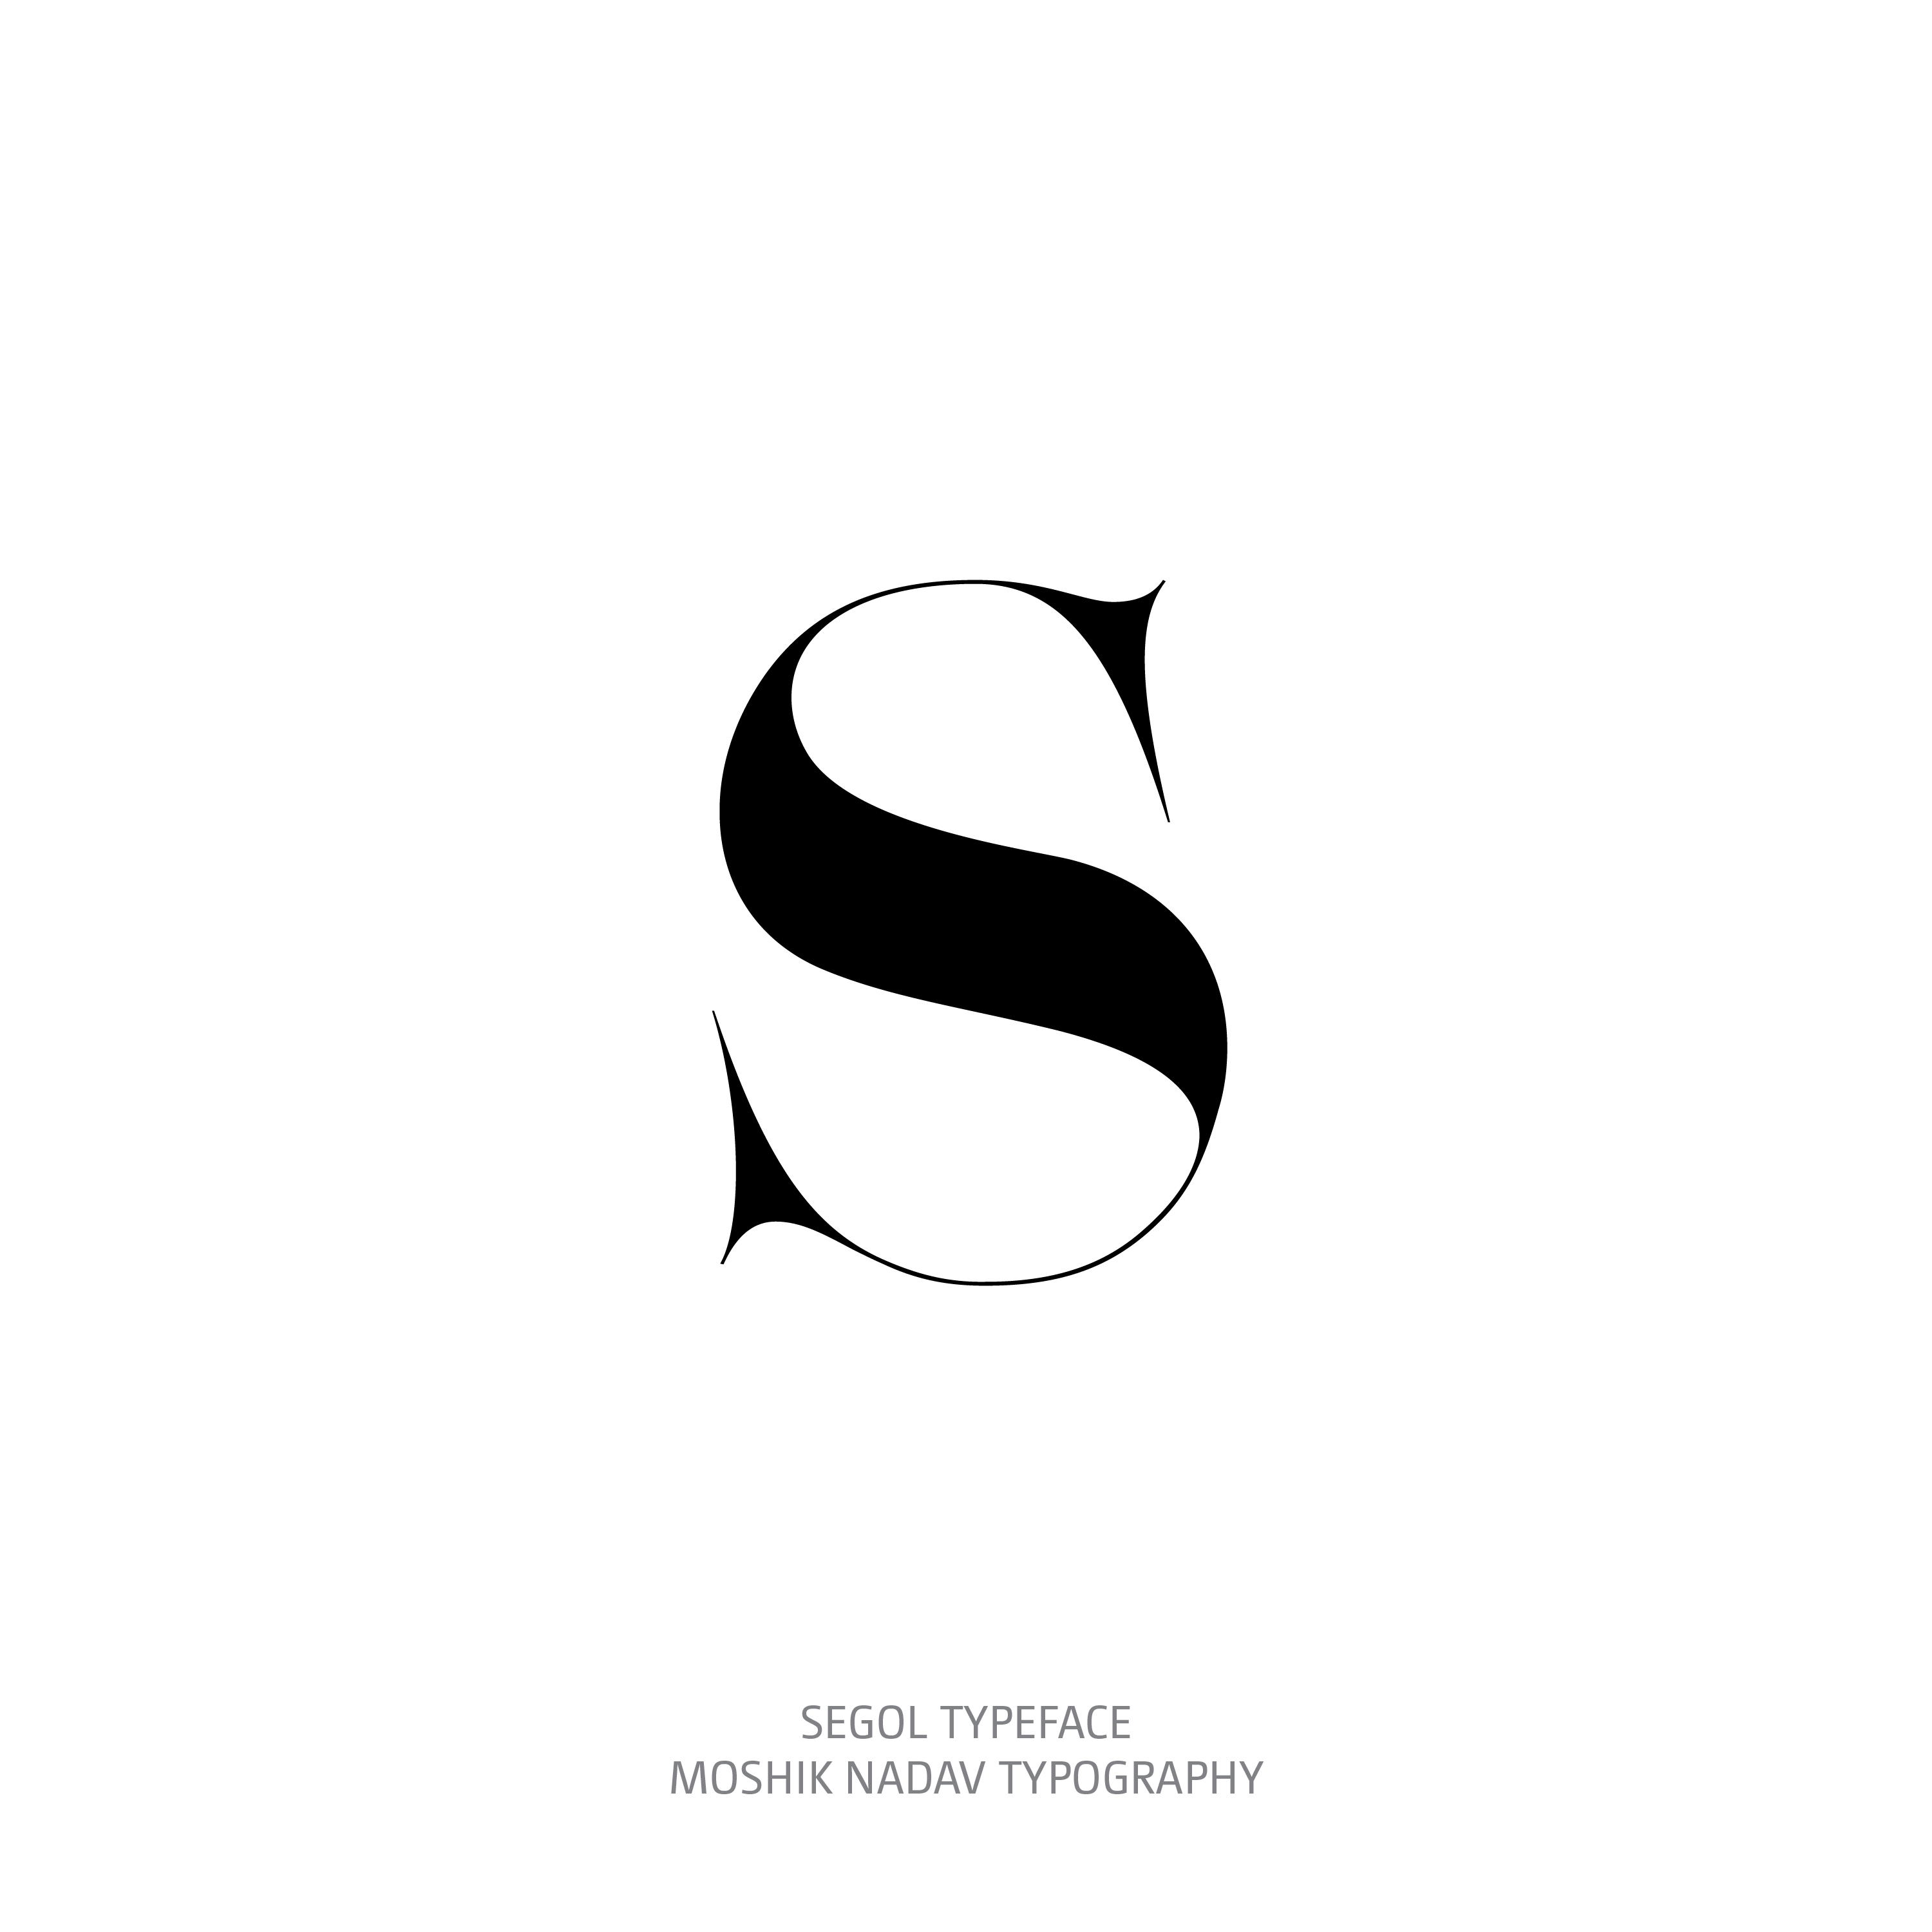 Segol Typeface s The Ultimate Font For Fashion Typography and sexy logos